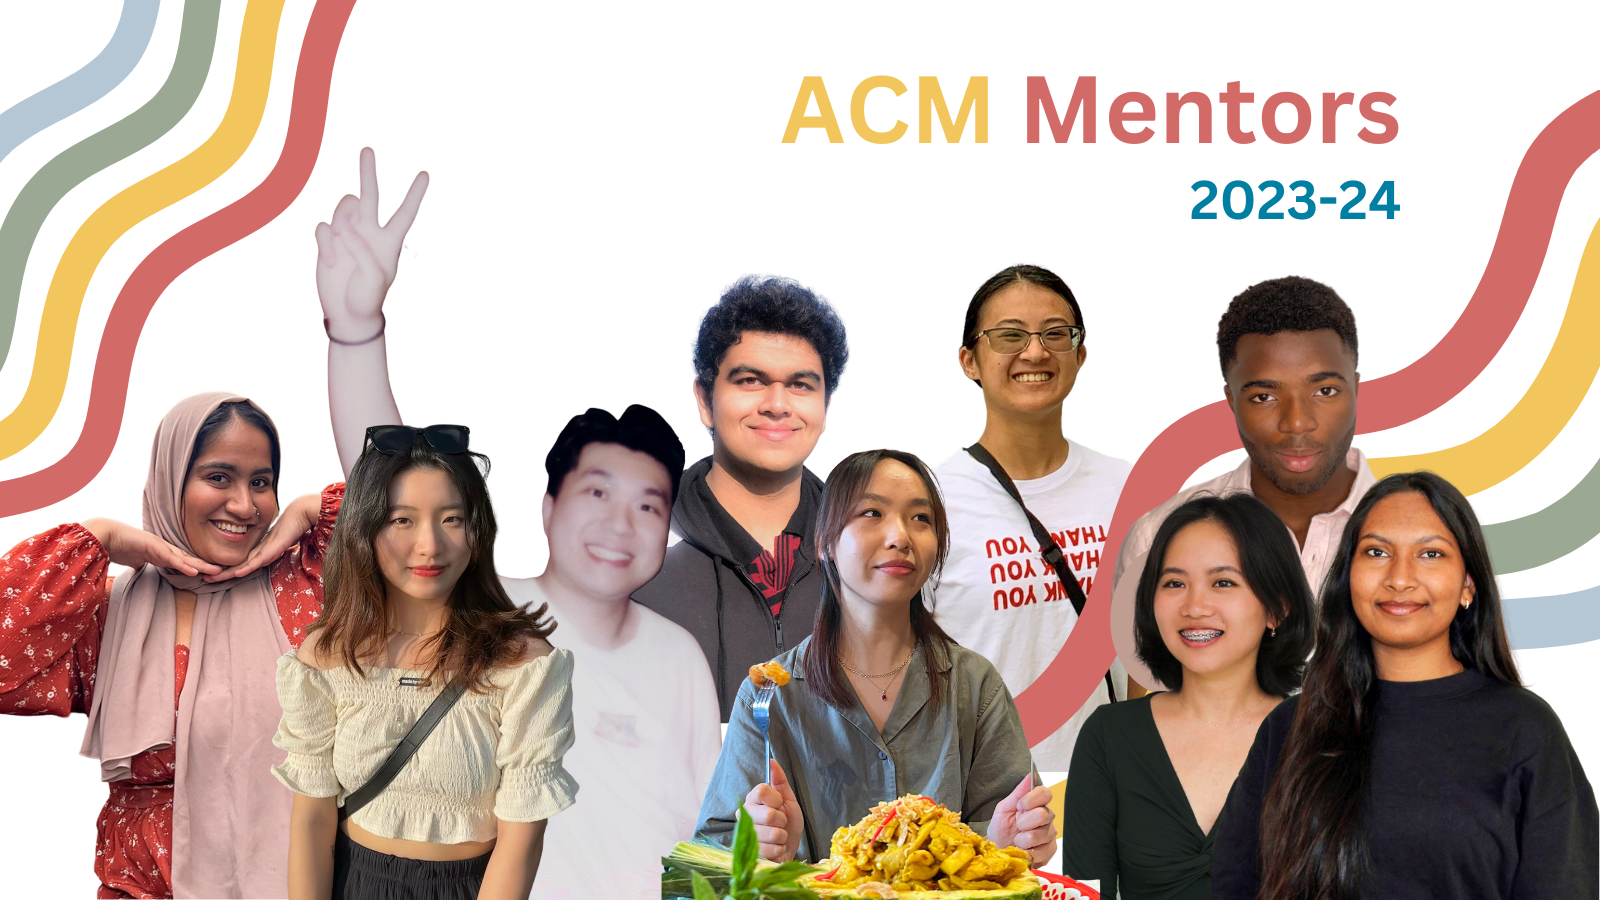 collage of the acm mentors headshot put together with rainbows in the background